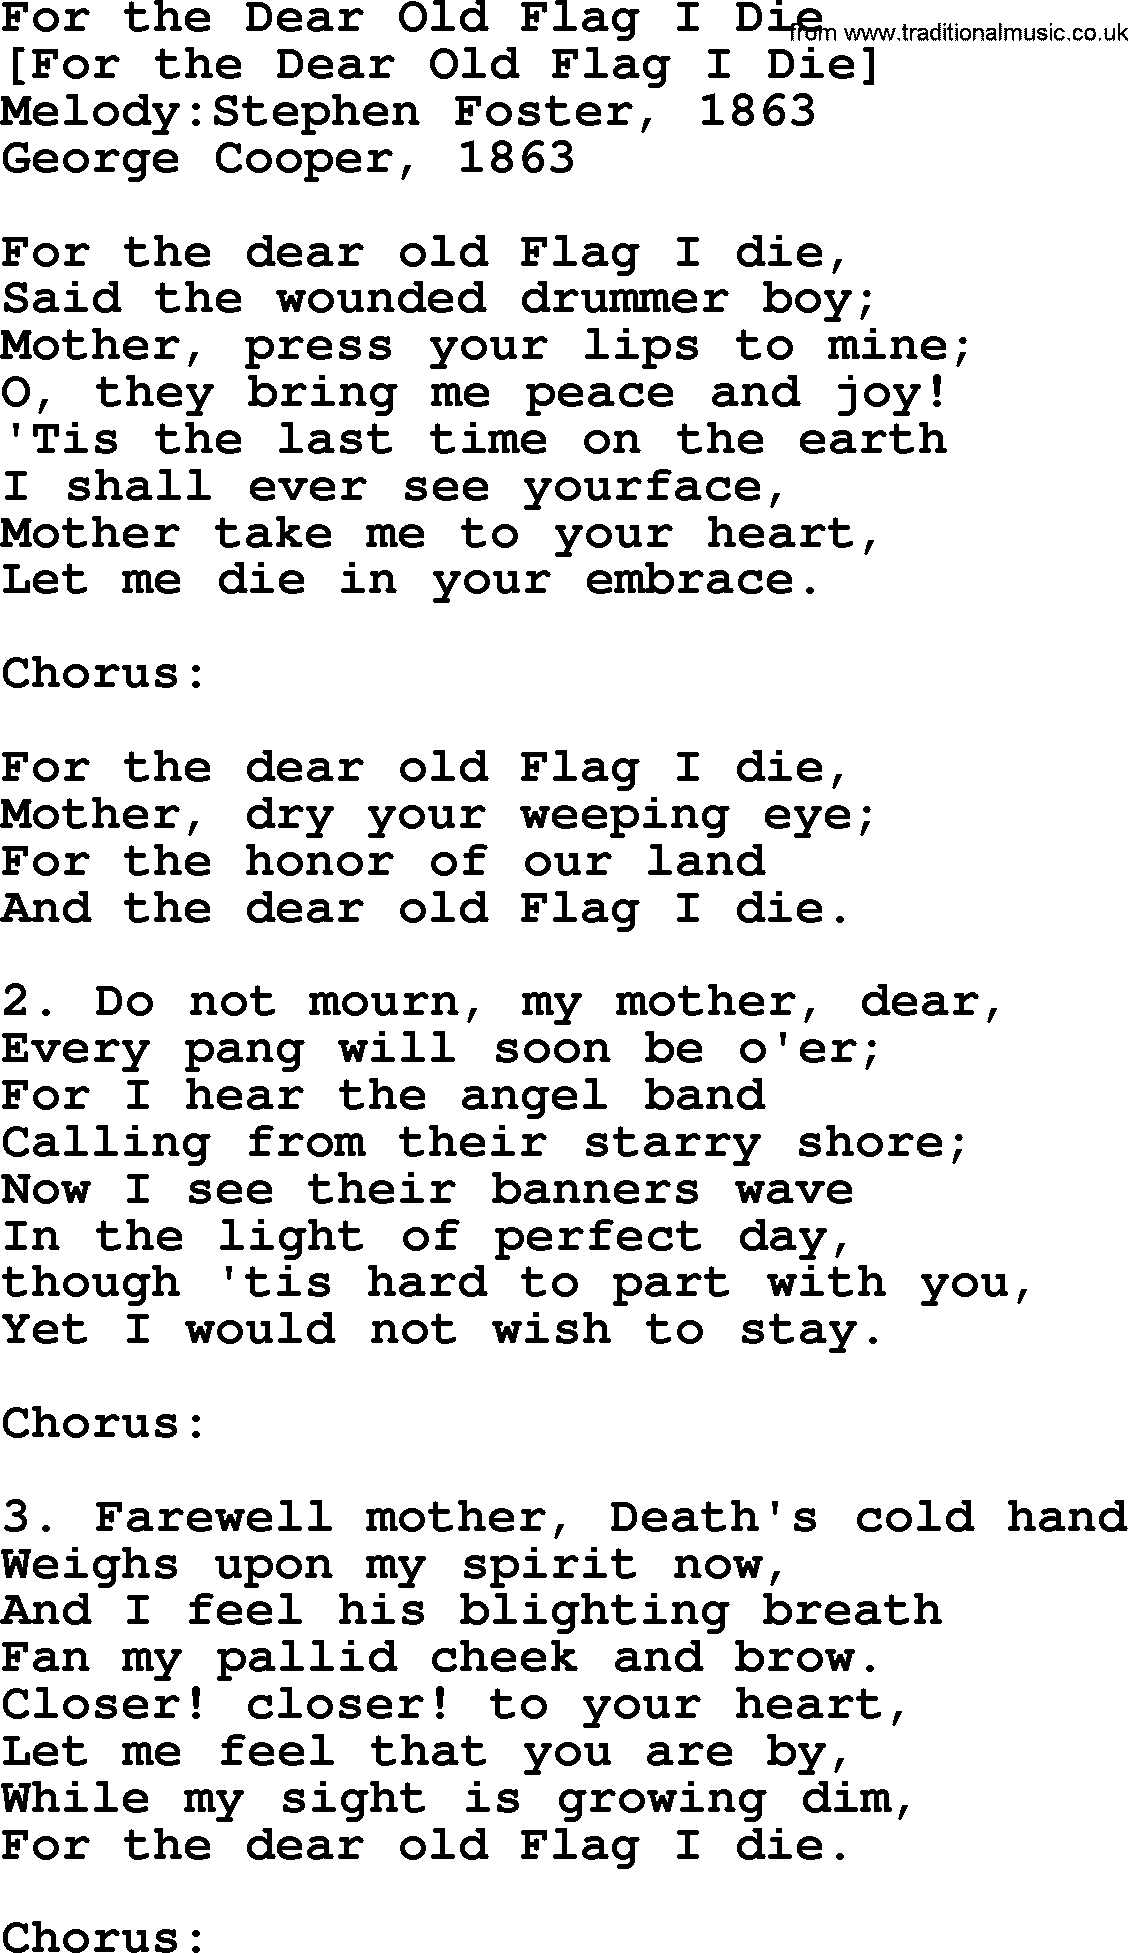 Old American Song: For The Dear Old Flag I Die, lyrics